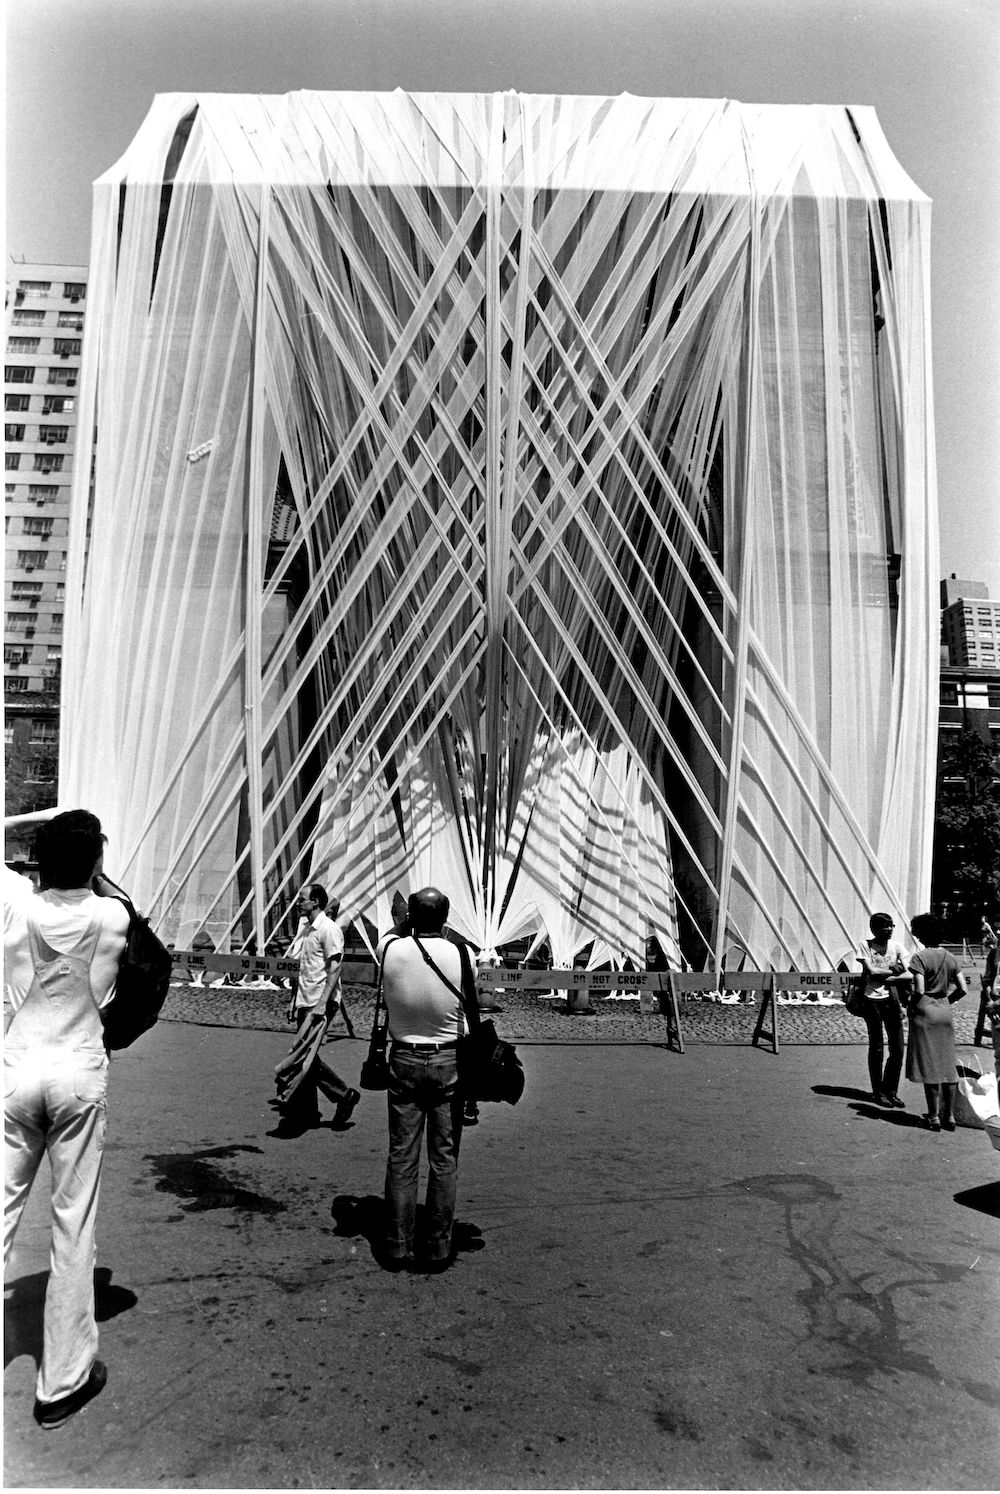 Francis Hines, Washington Square Arch Wrap, 1980, Washington Square Park, Manhattan, NYC Parks Photo Archive. In 1980 Francis Hines bound the iconic Washington Square Arch in strips of fabric, described as a giant bandage for a wounded monument. Sponsored by NYC, the installation was used to raise funds to restore the monument and park.<br/>